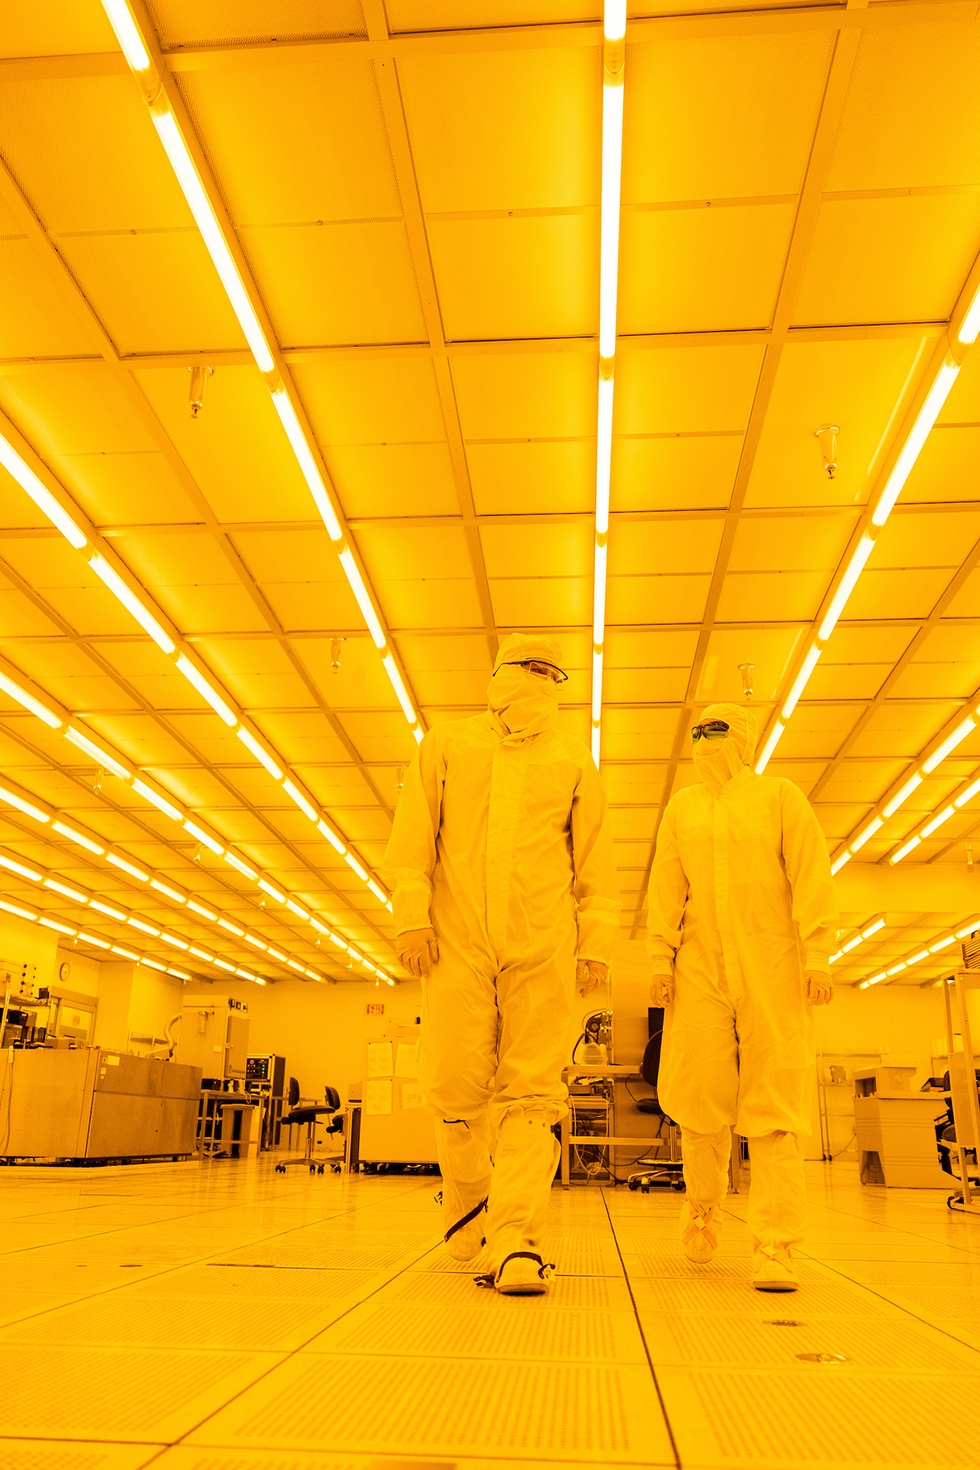 Two people, one taller than the other, walk through a yellow-lit laboratory. They are wearing white jumpsuits, face masks, and head covering.